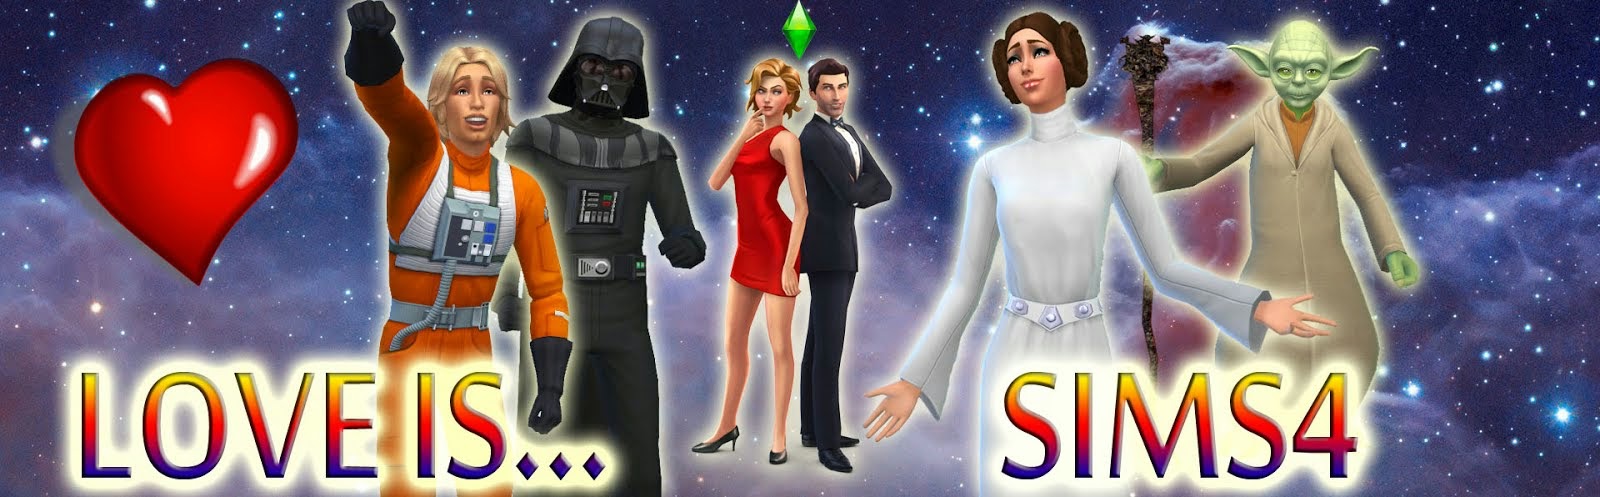 Love is... Sims4